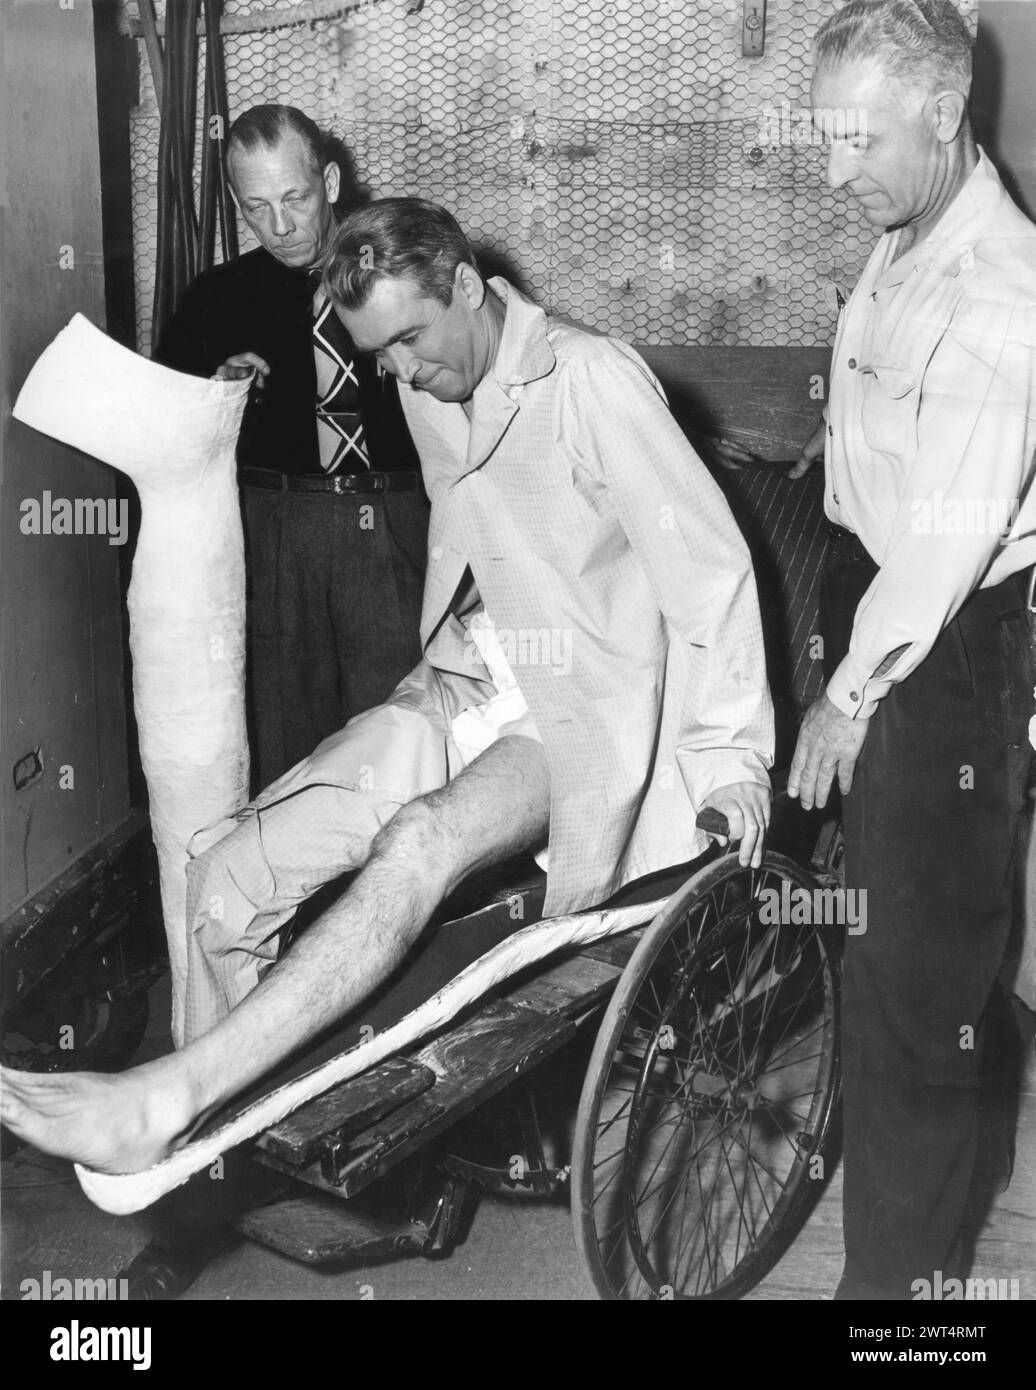 American Film Actor JAMES STEWART being fitted with plaster make-up on his leg for his role in REAR WINDOW 1954 Director ALFRED HITCHCOCK Writer JOHN MICHAEL HAYES Costume Design EDITH HEAD Music FRANZ WAXMAN Paramount Pictures Stock Photo